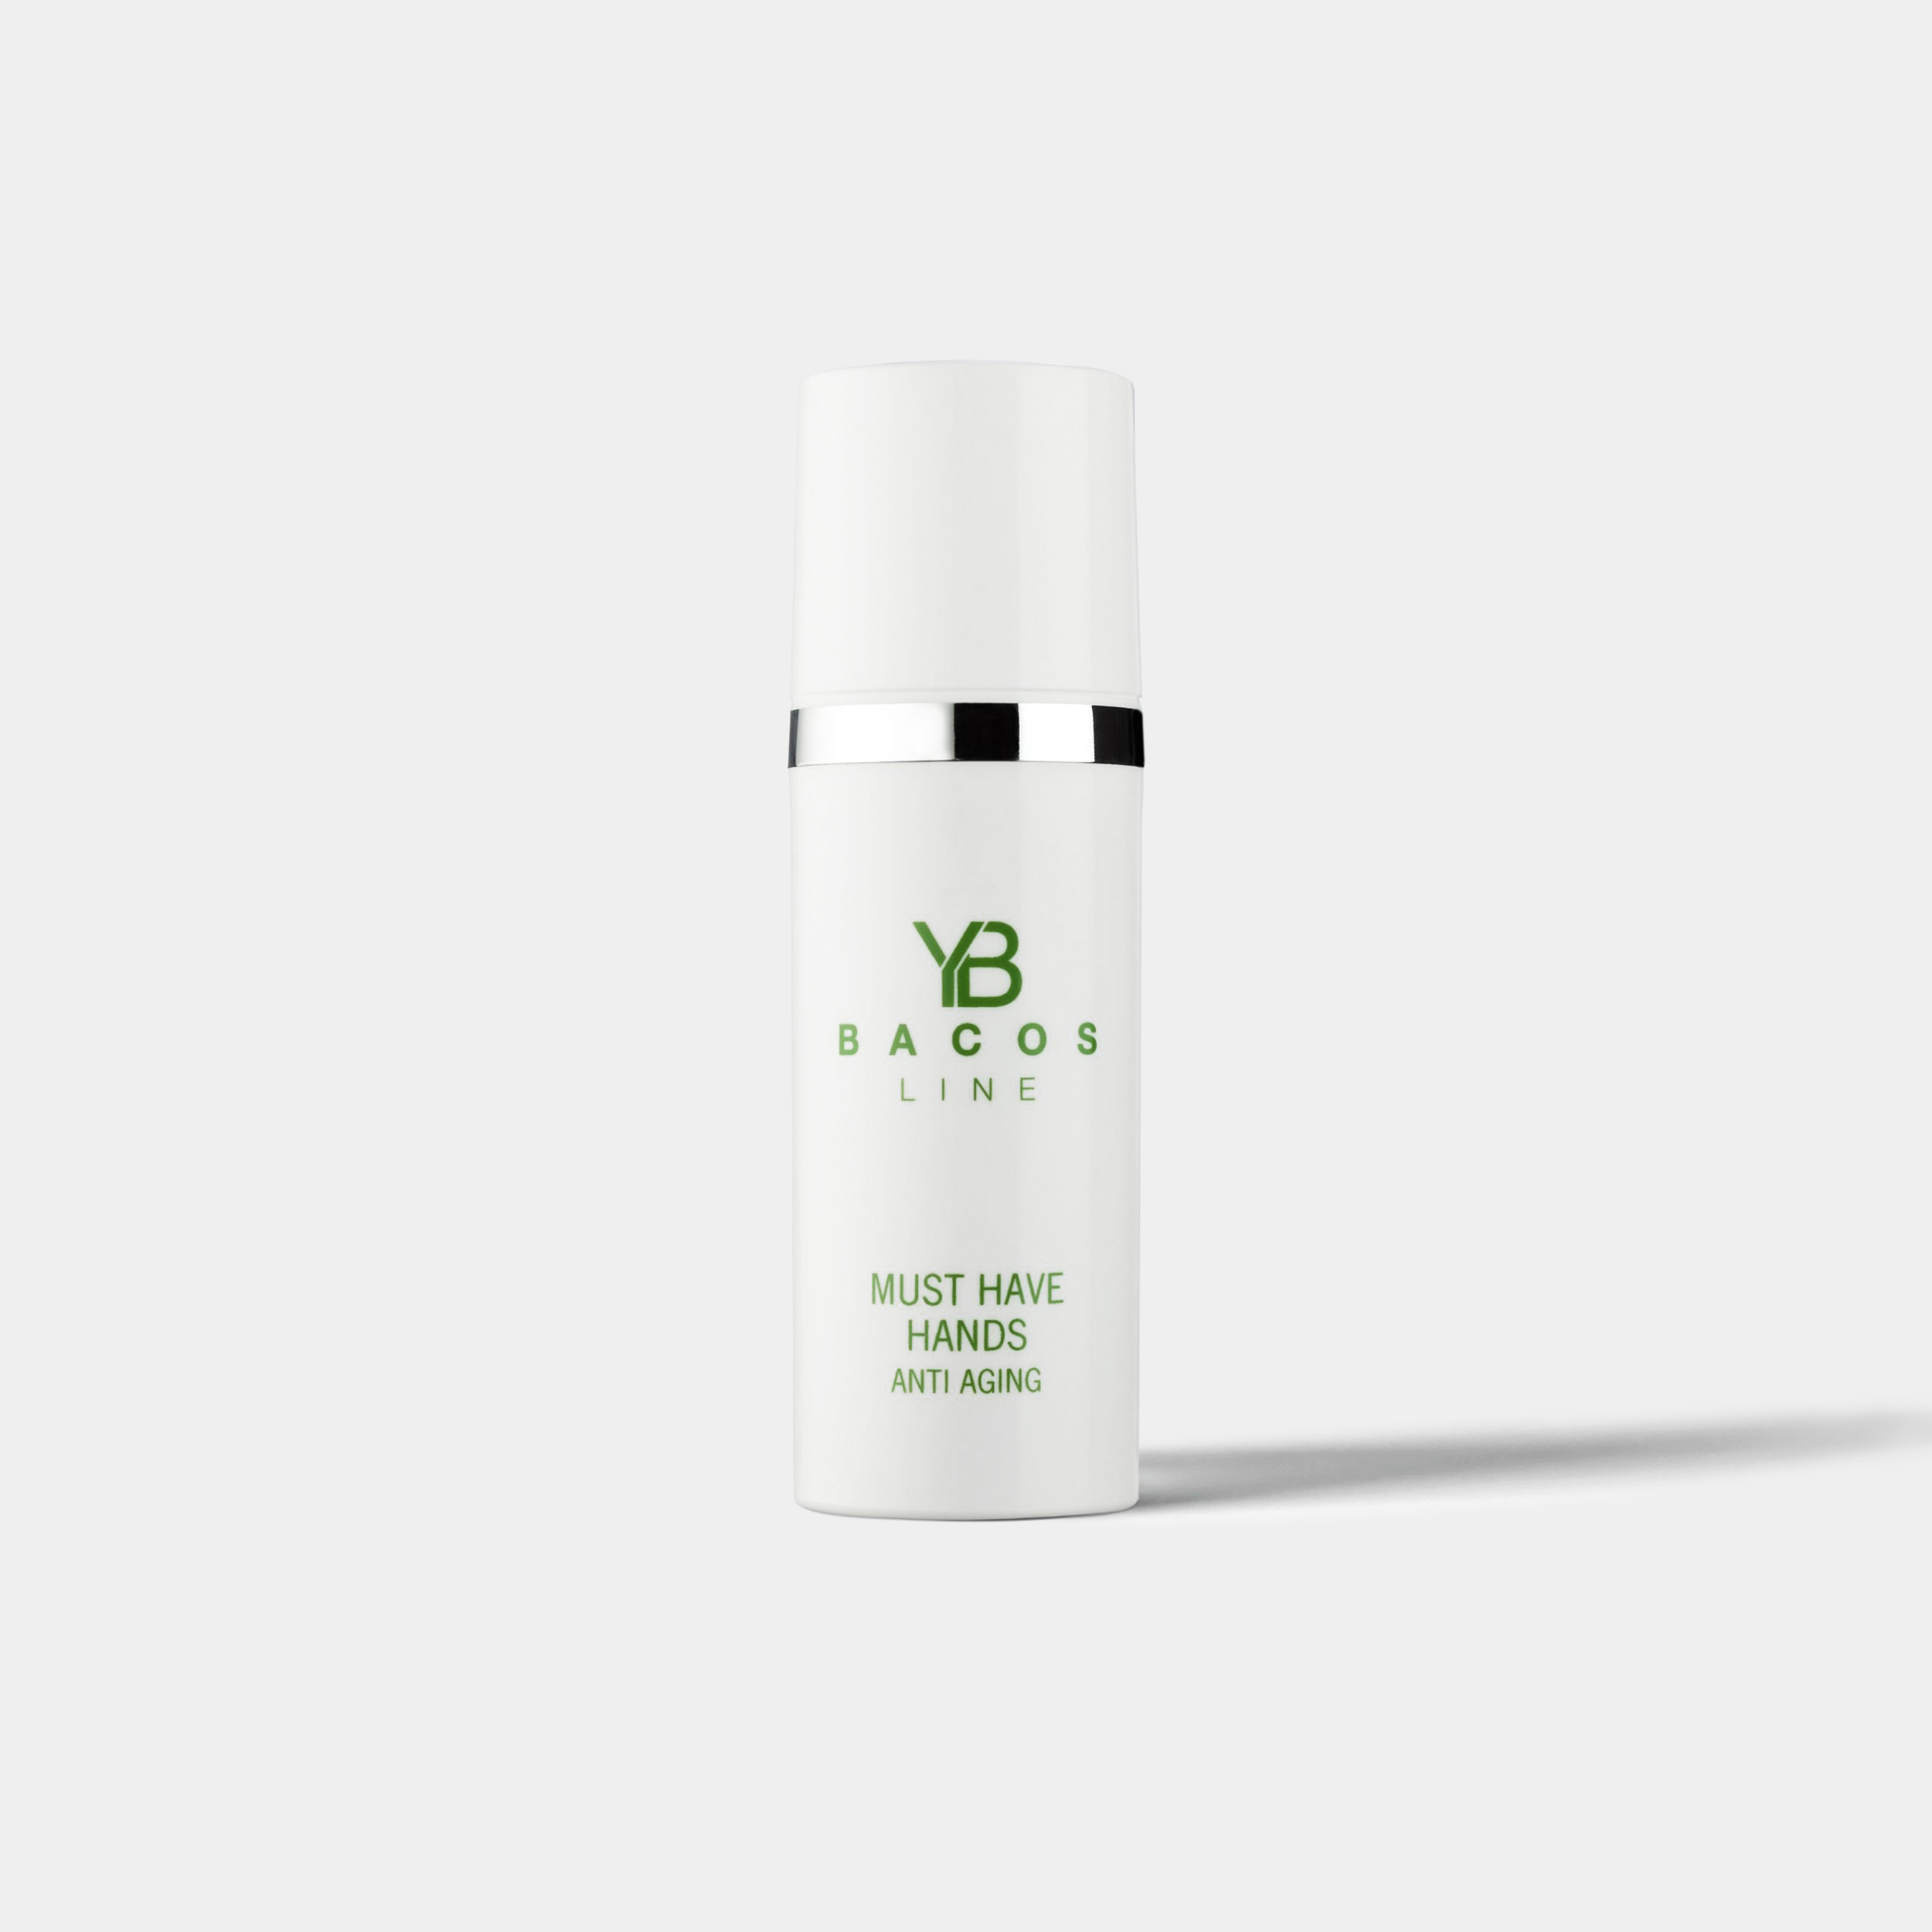 YB BACOS LINE MUST HAVE HANDS - 50 ml